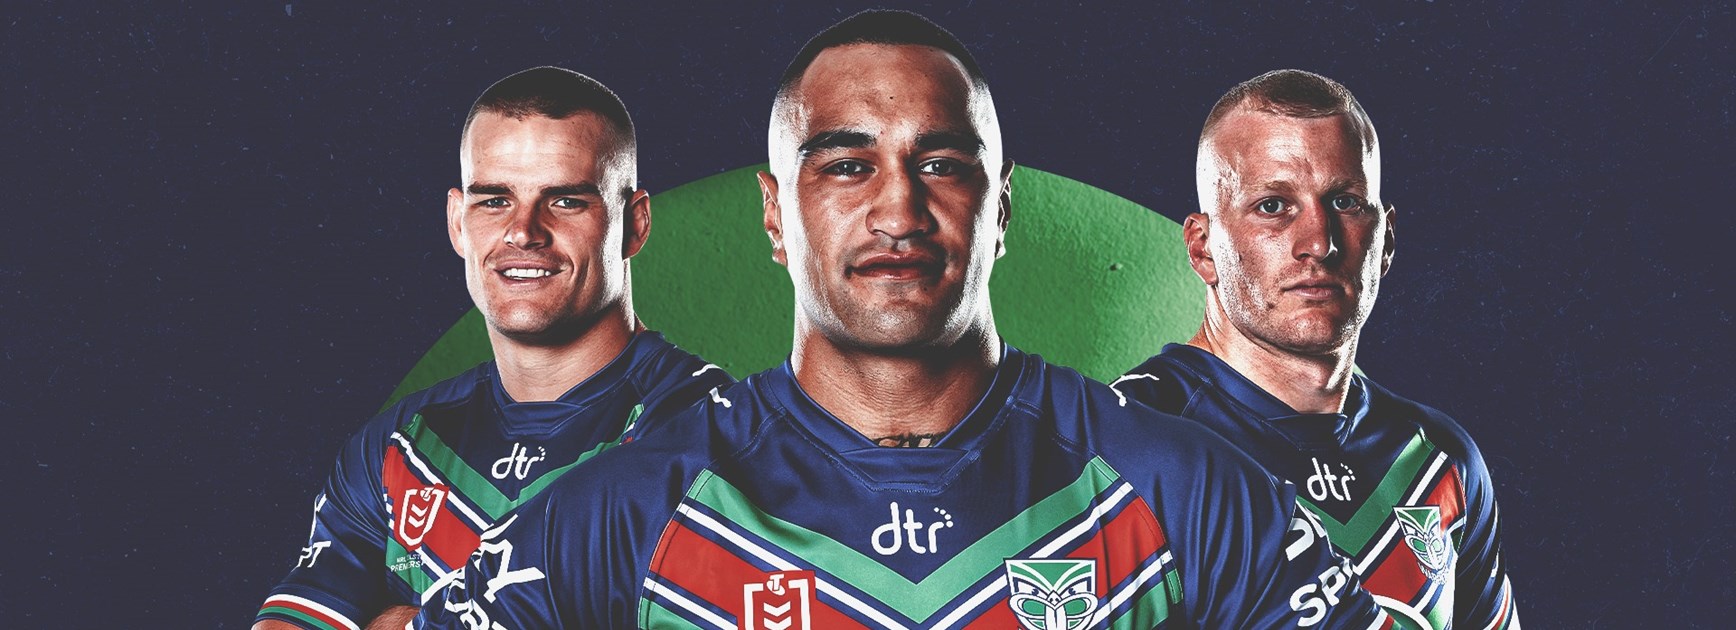 Rd 21 Team List: Pack changes as Afoa and Niukore return